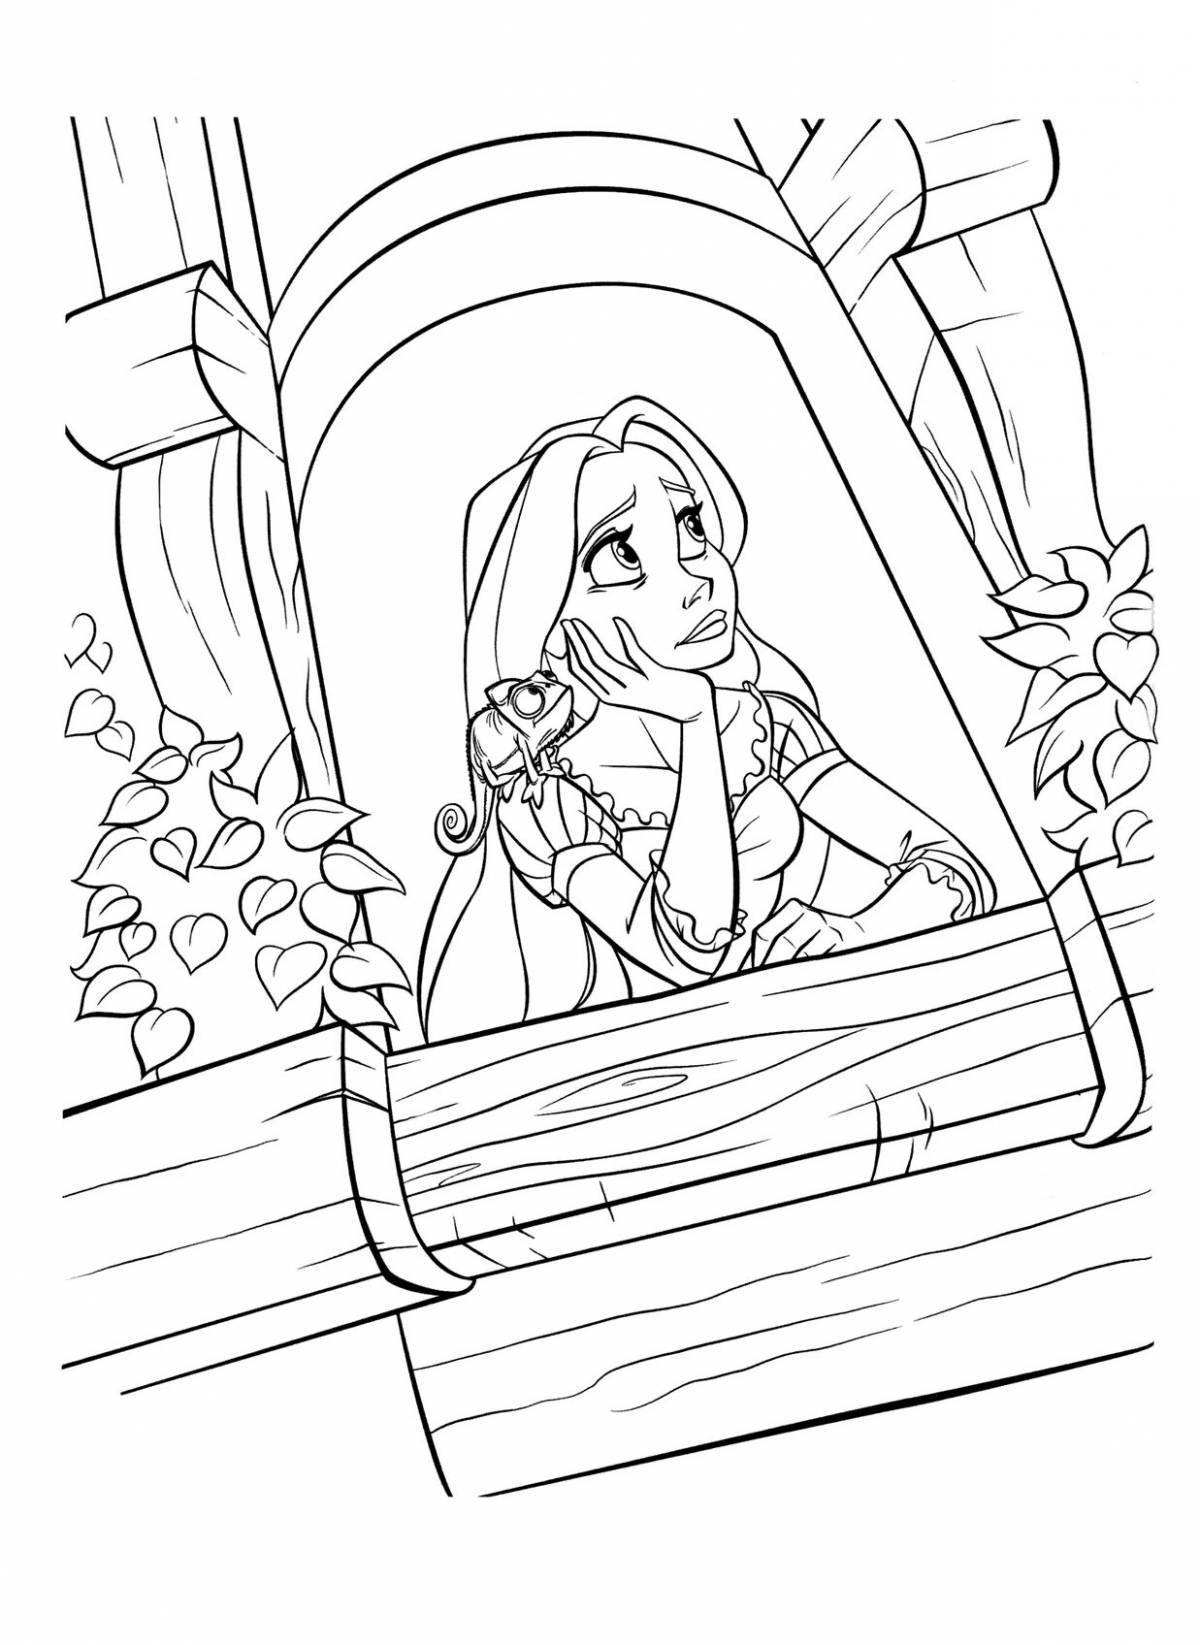 Rapunzel wild coloring book for kids 5-6 years old